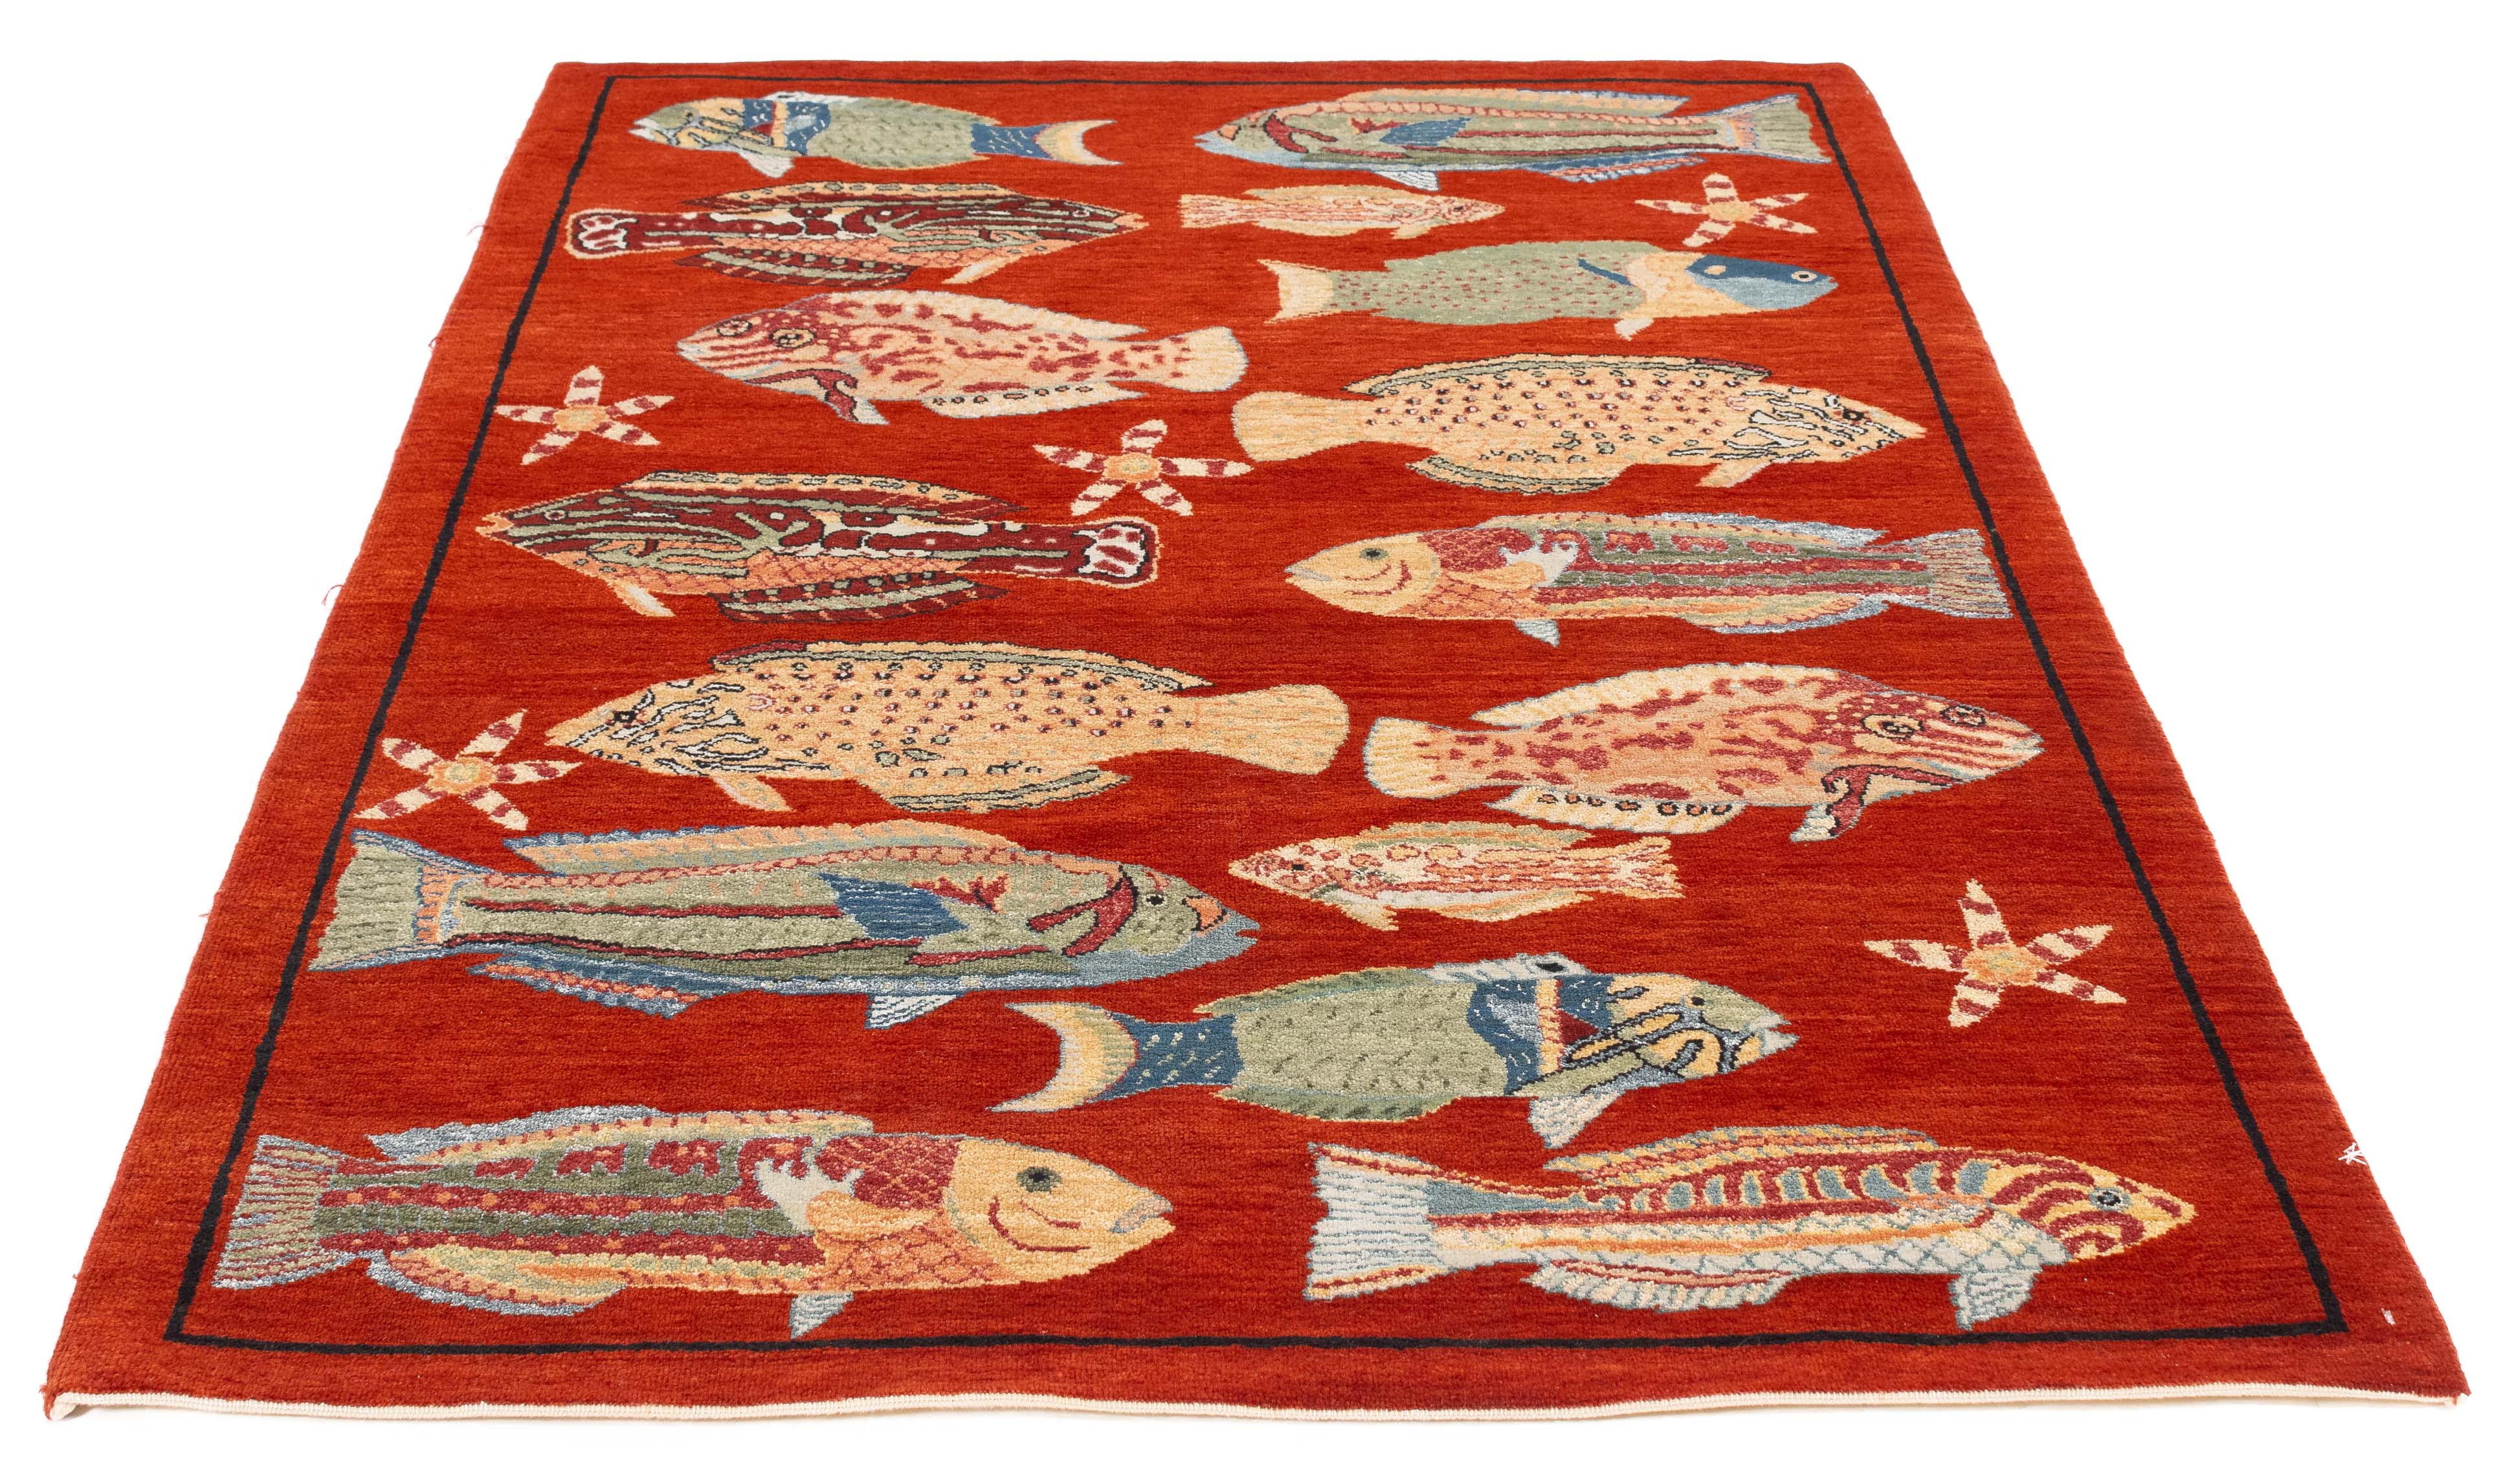 New Indian Coral Reef Rug 4'1 x 6'3